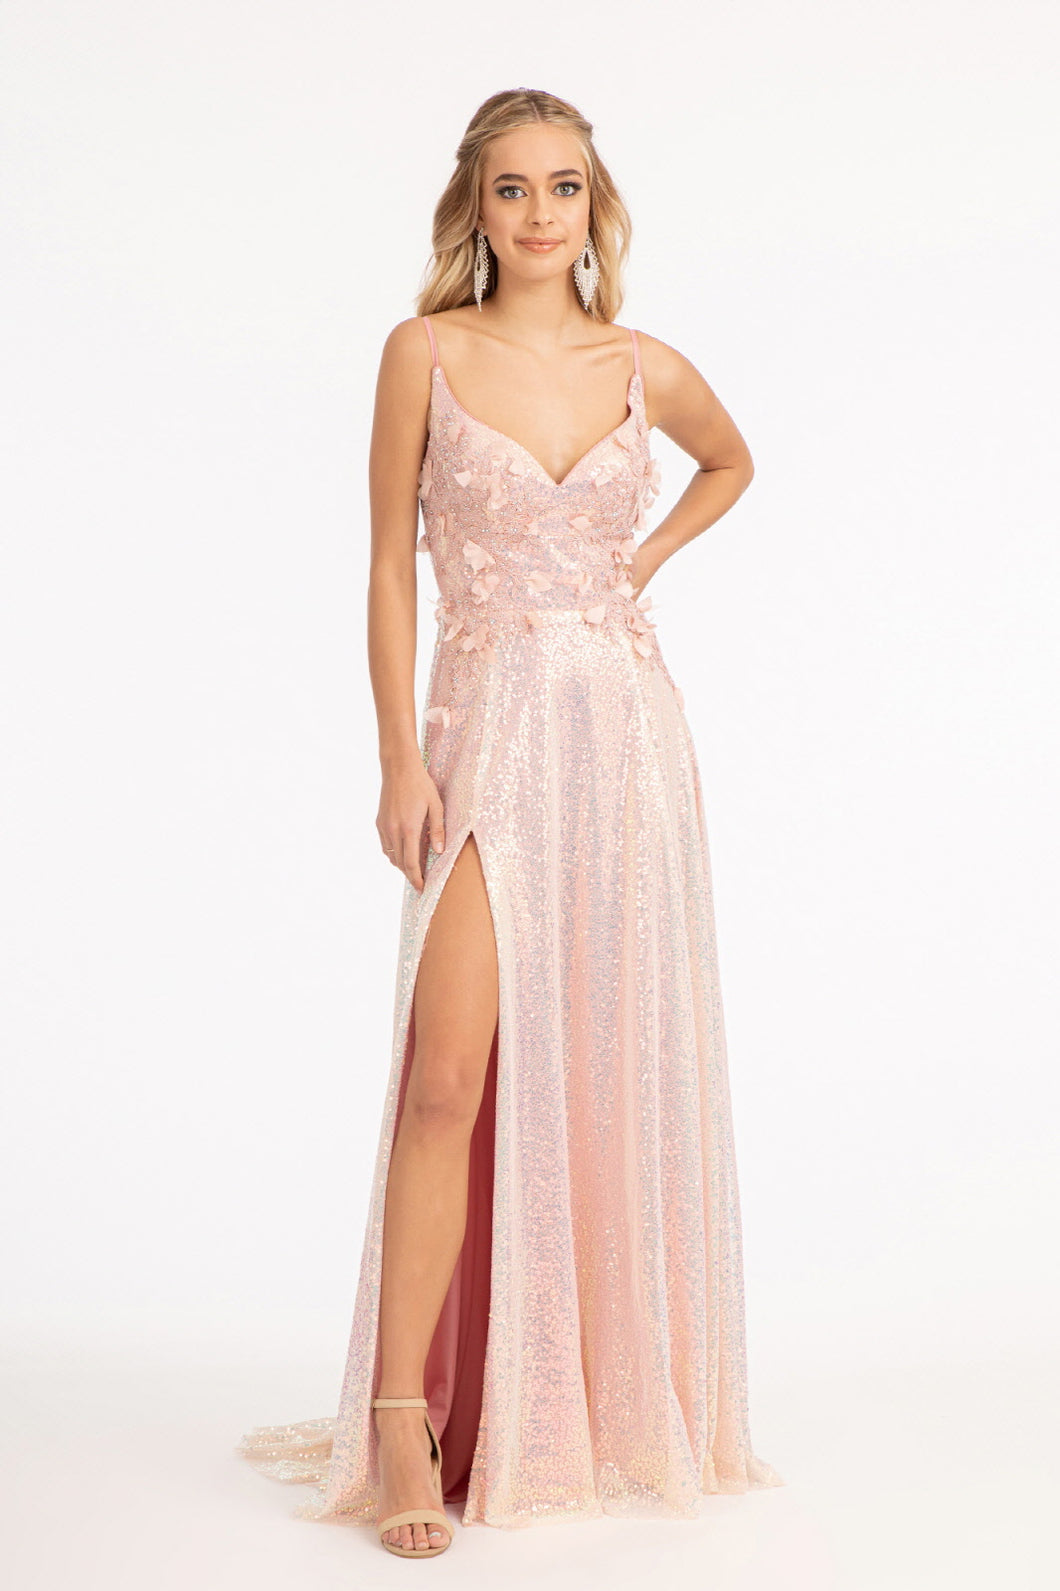 GL 3027 - Iridescent Full Sequin A-Line Prom Gown with Floral Appliqued V-Neck Bodice & Leg Slit PROM GOWN GLS XS ROSE GOLD 